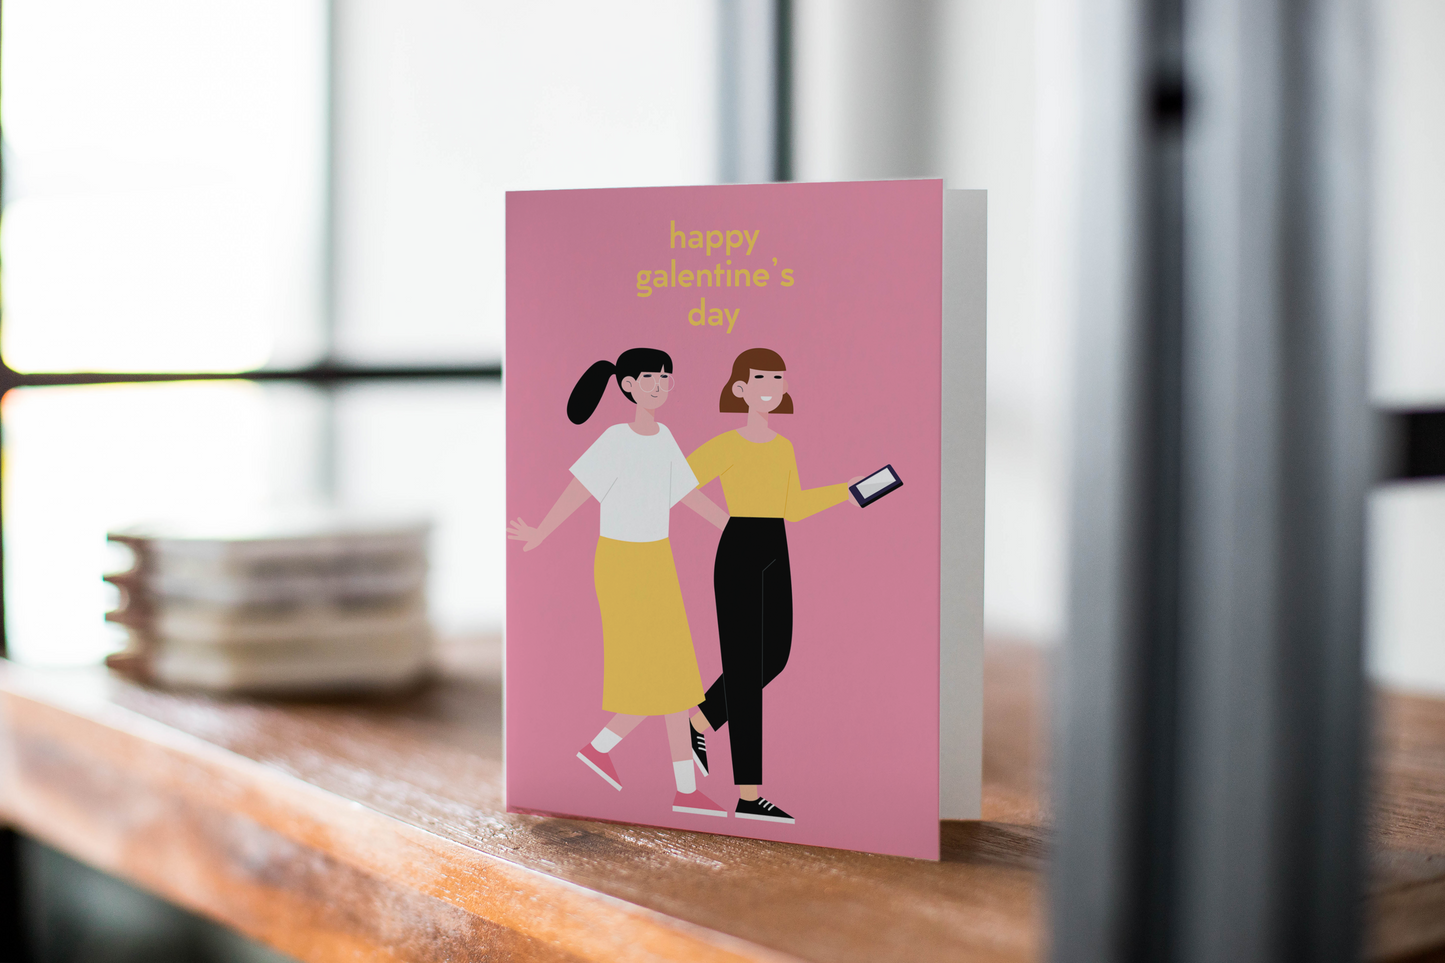 Happy Galentine's Day Greeting Card - Valentine's Day Greeting Card.